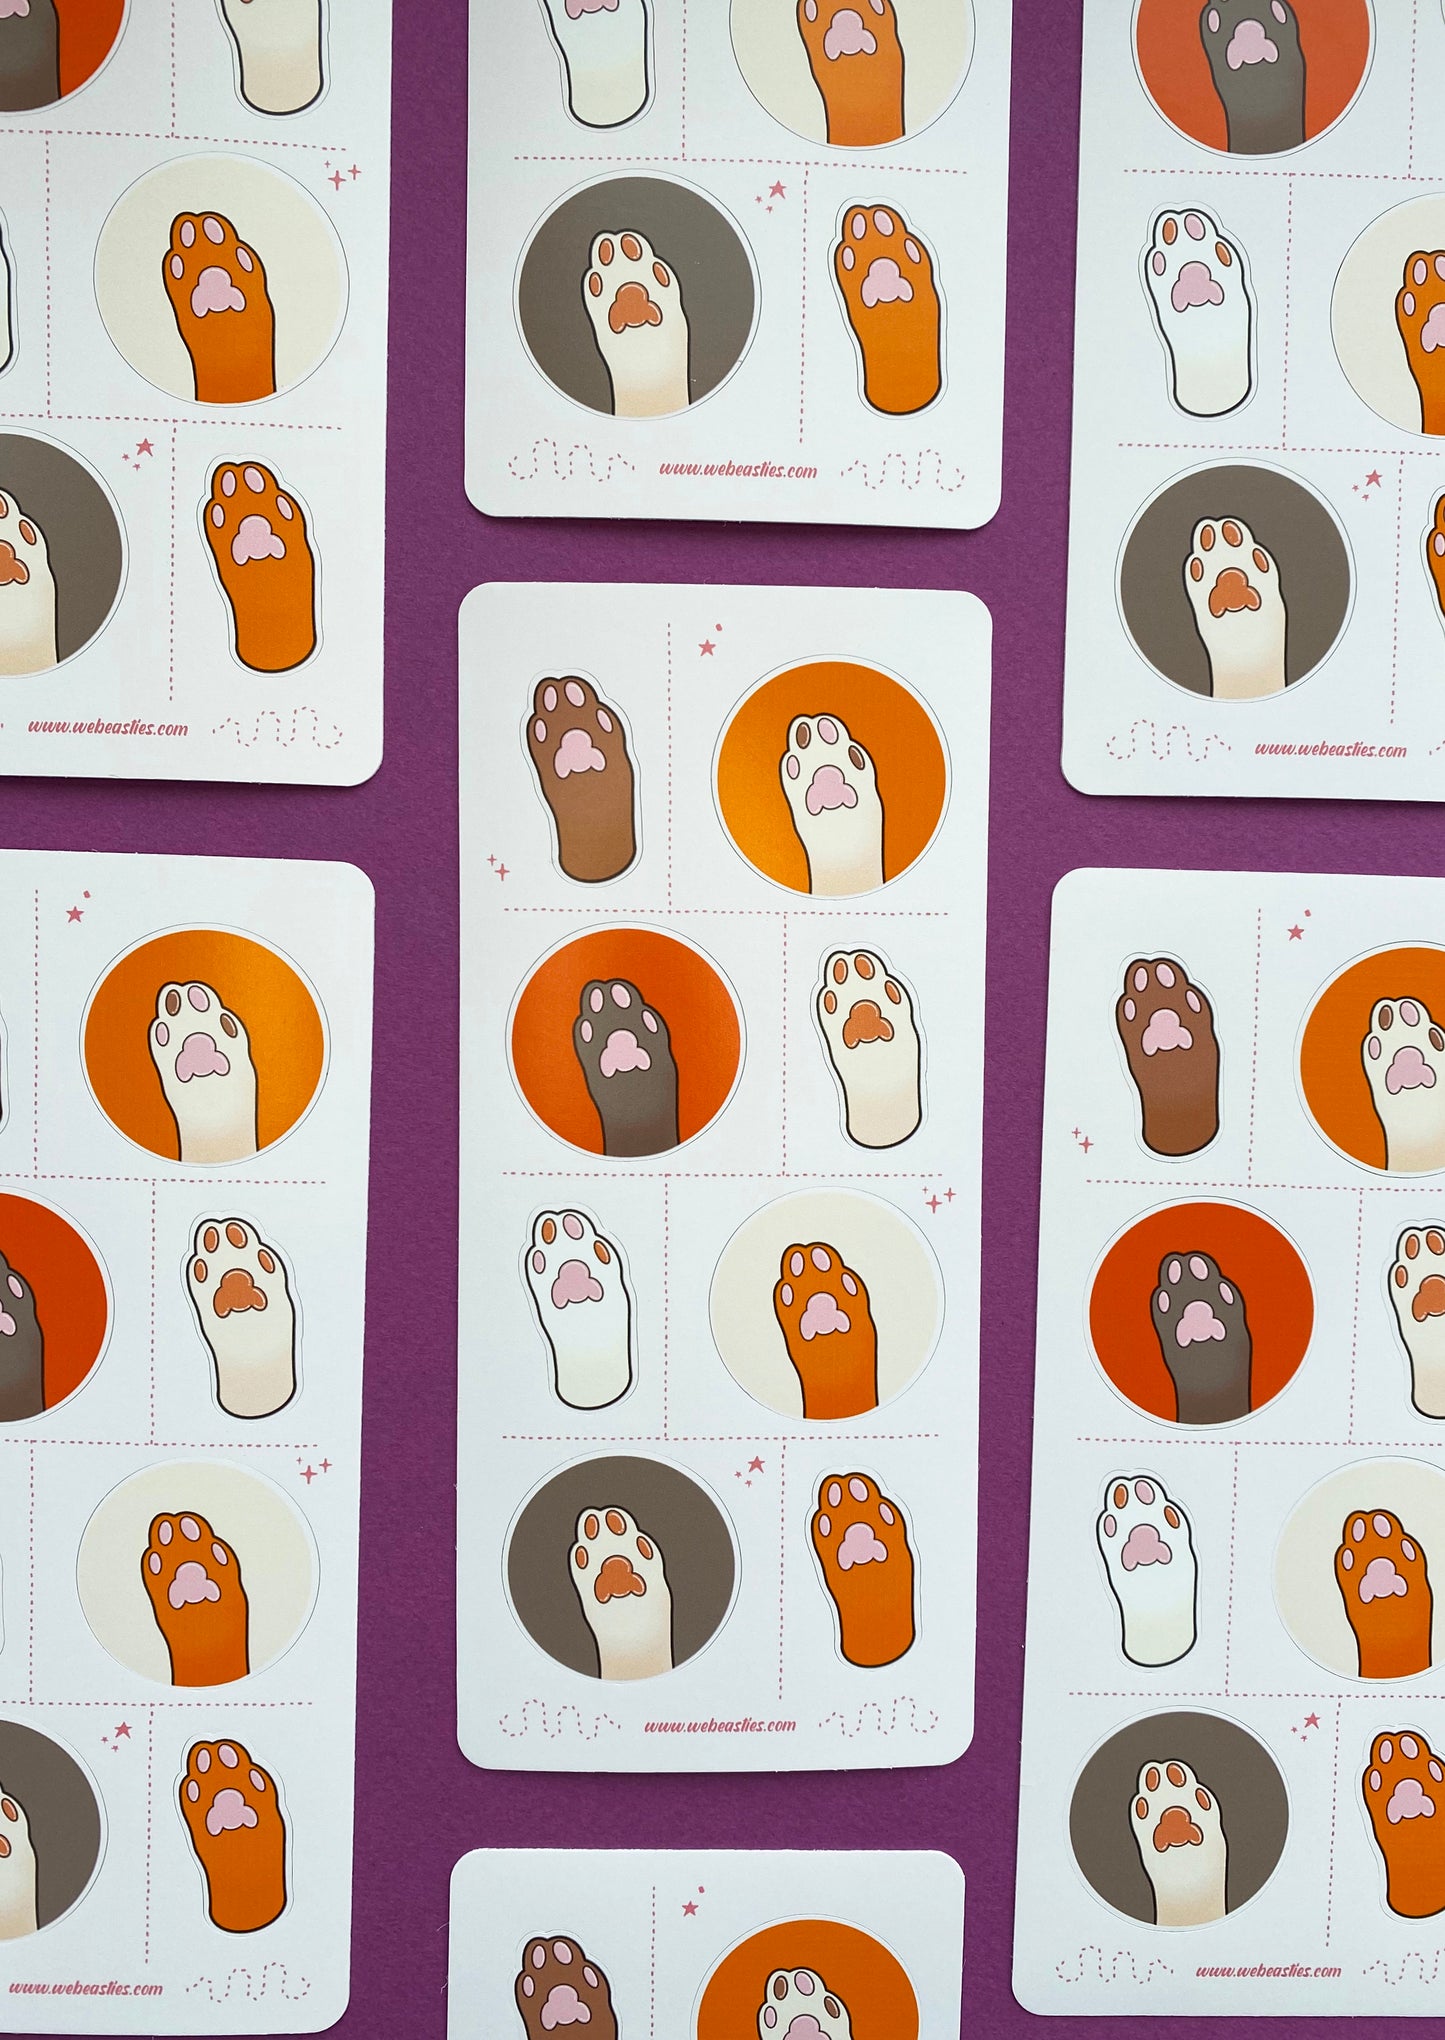 A collection of sticker sheets featuring 8 illustrations of cat's paws and toe pads. The paws are light brown, dark brown, white, and off white. The toe pads are pink, brown, or both. Four paws sit against orange, dark orange, cream or light brown backgrounds and the others are an outline of the paw with no background. The sticker sheet sits against a purple background.